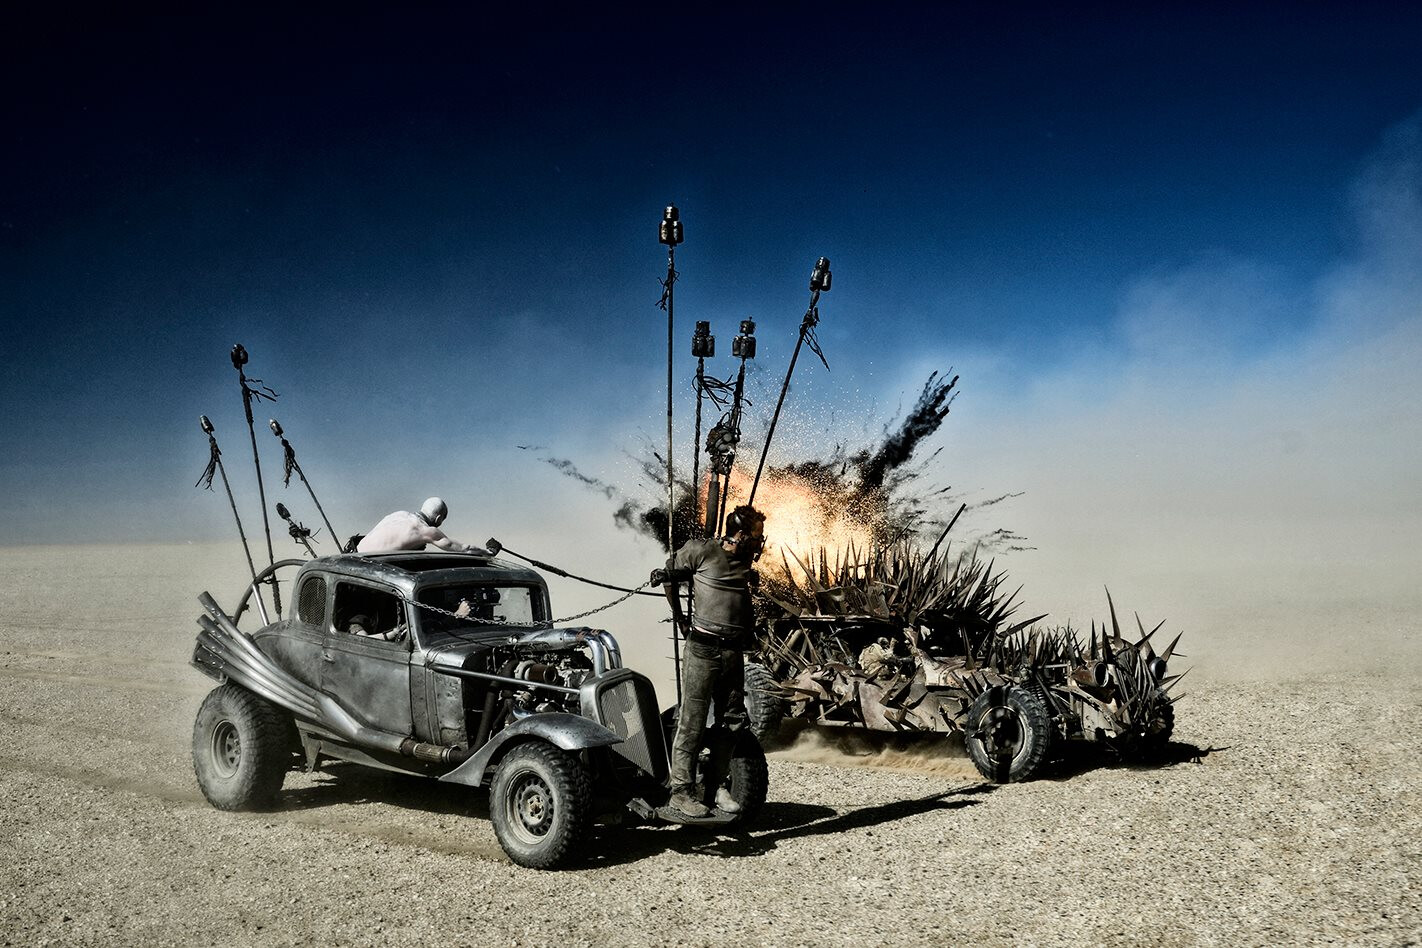 VIDEO: THE MAD MACHINES OF MAD MAX: FURY ROAD